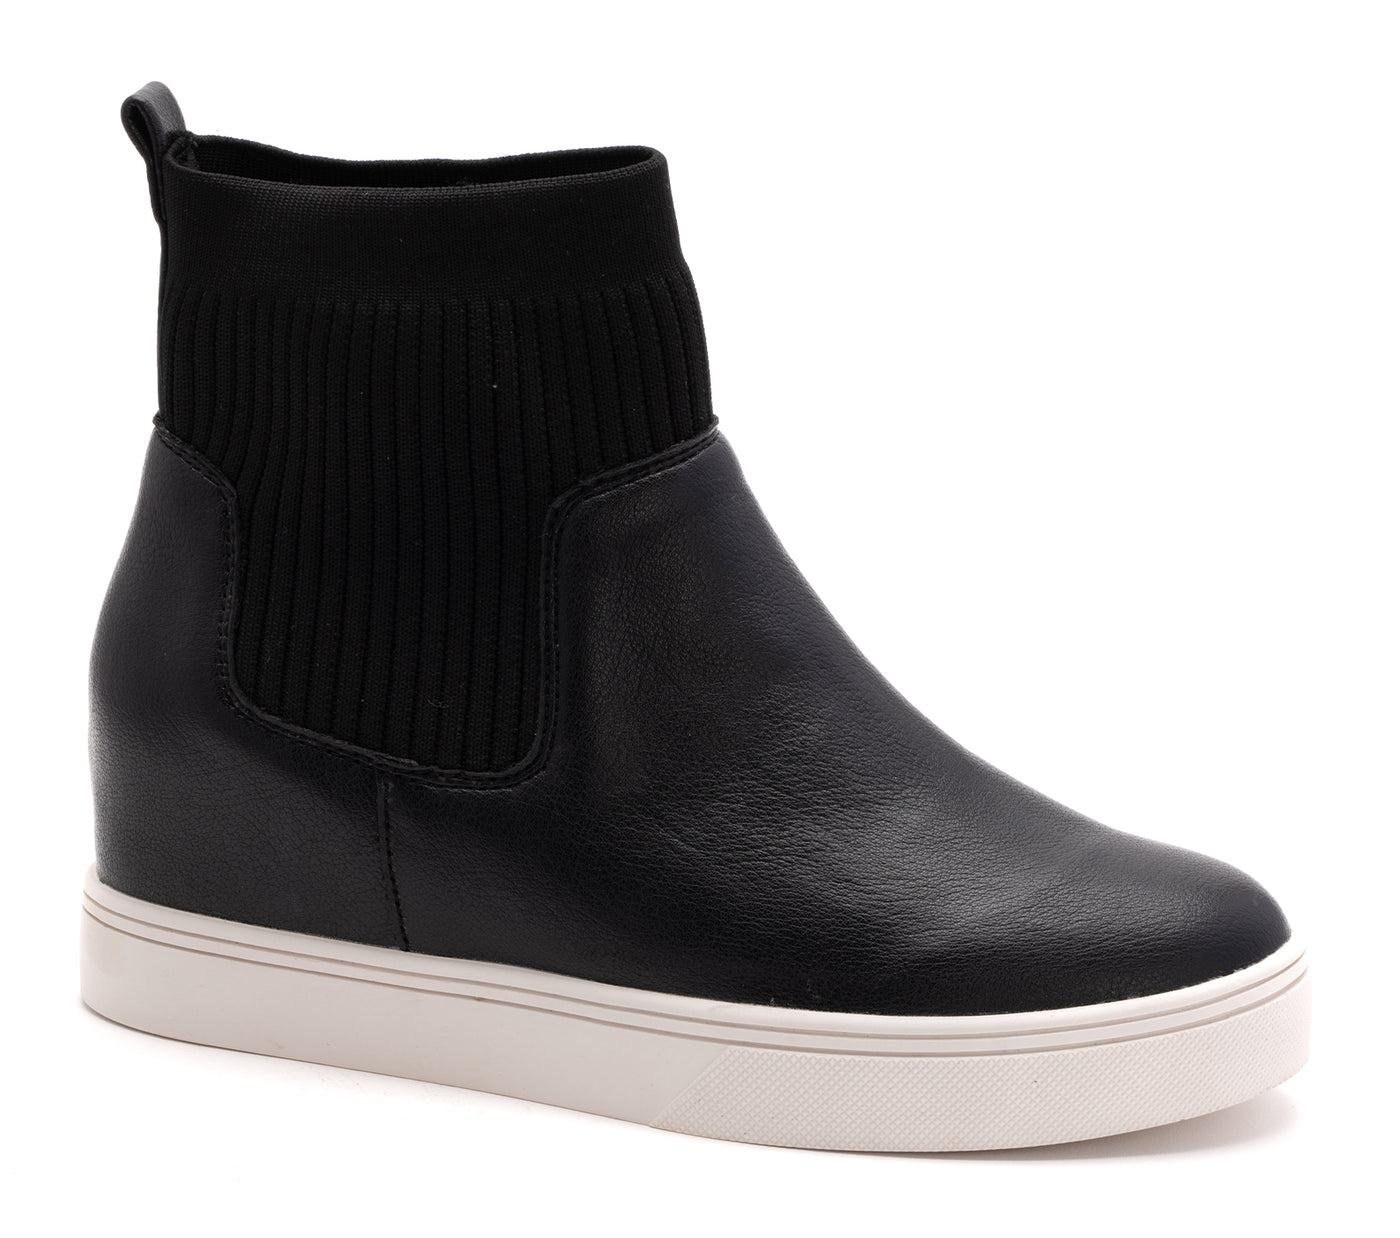 Corkys "Sweater Weather" Boots in Black